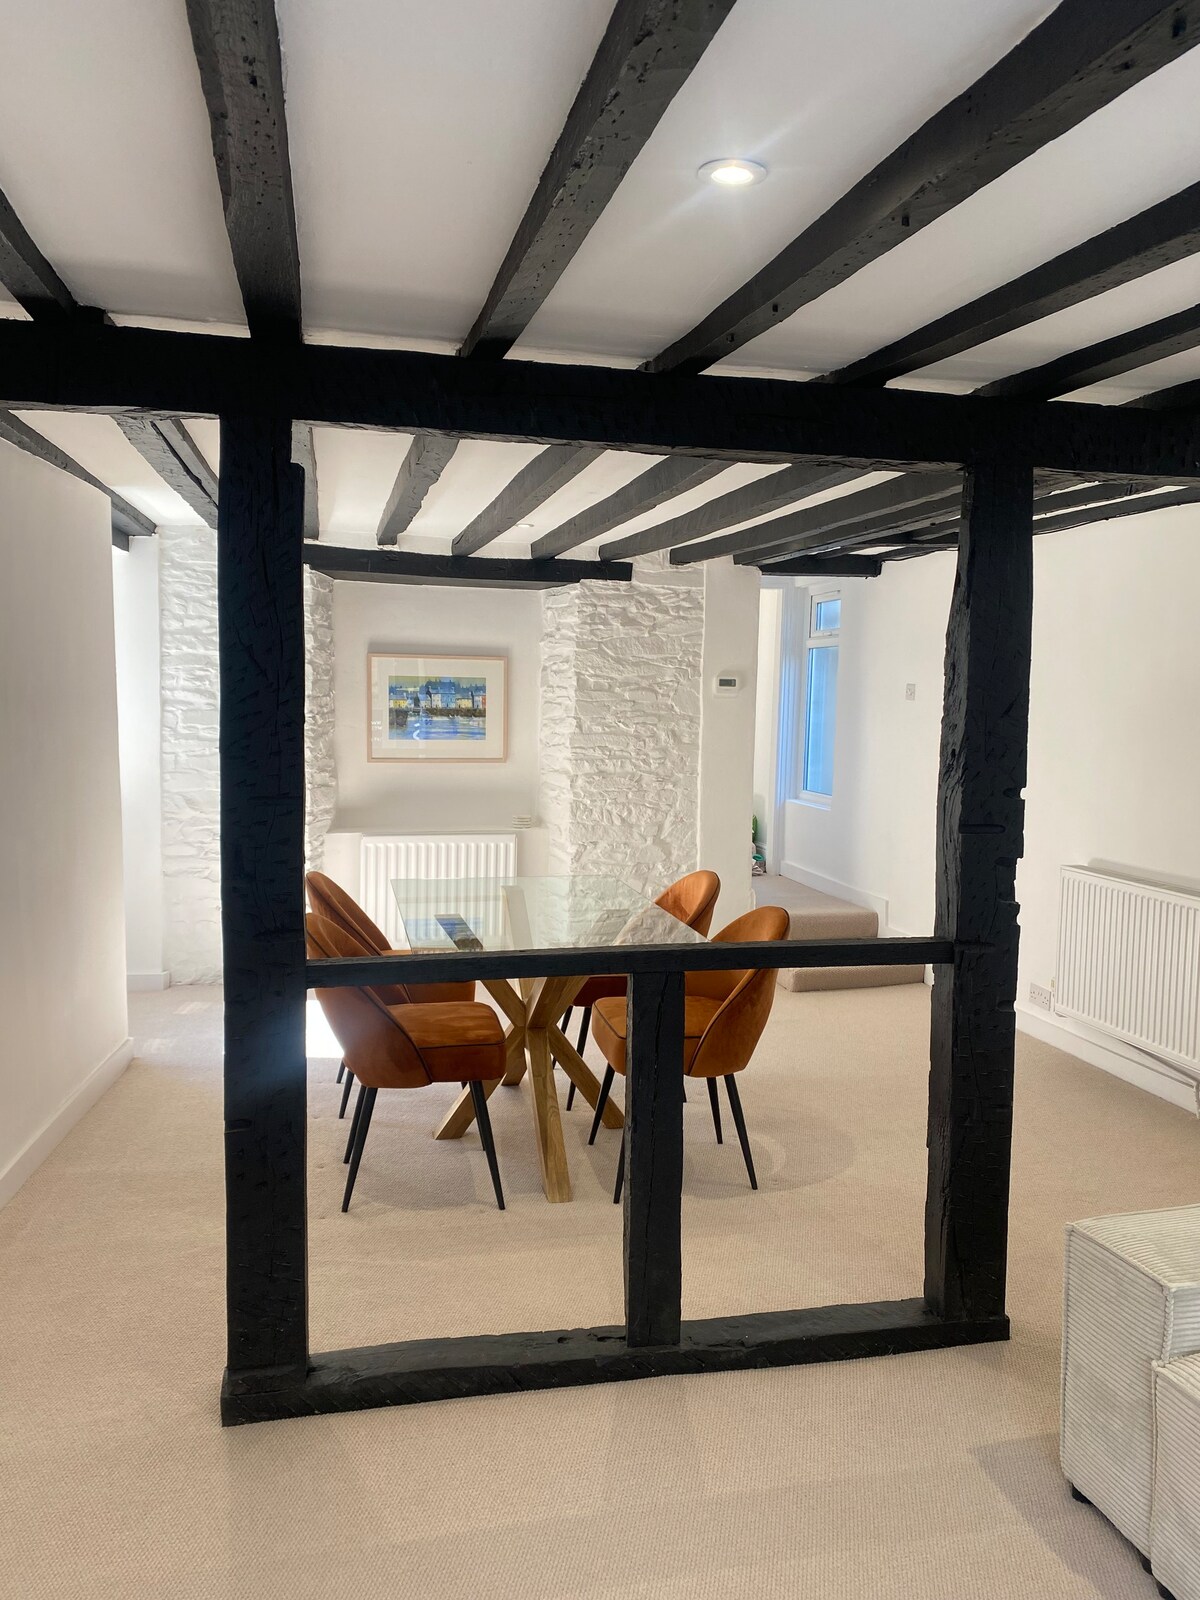 Newly refurbished property in the centre of Conwy